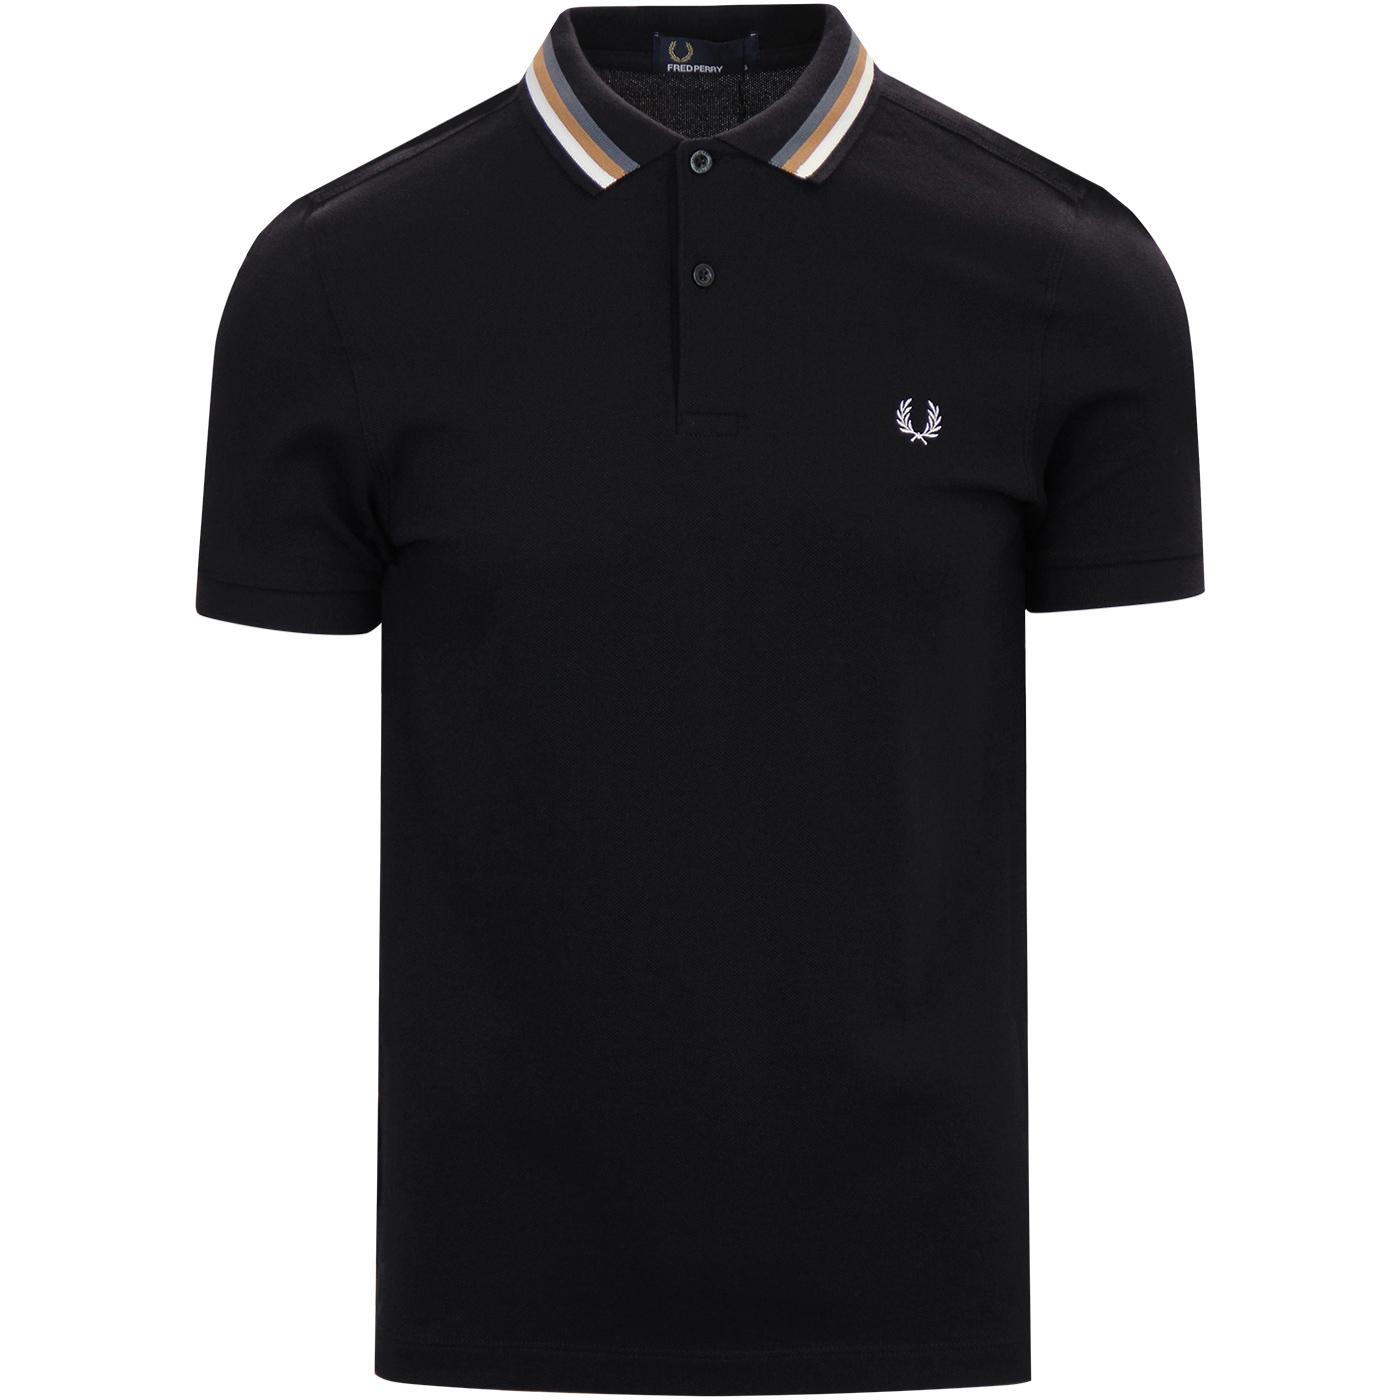 FRED PERRY Bomber Stripe Retro Mod Tipped Polo Top Black